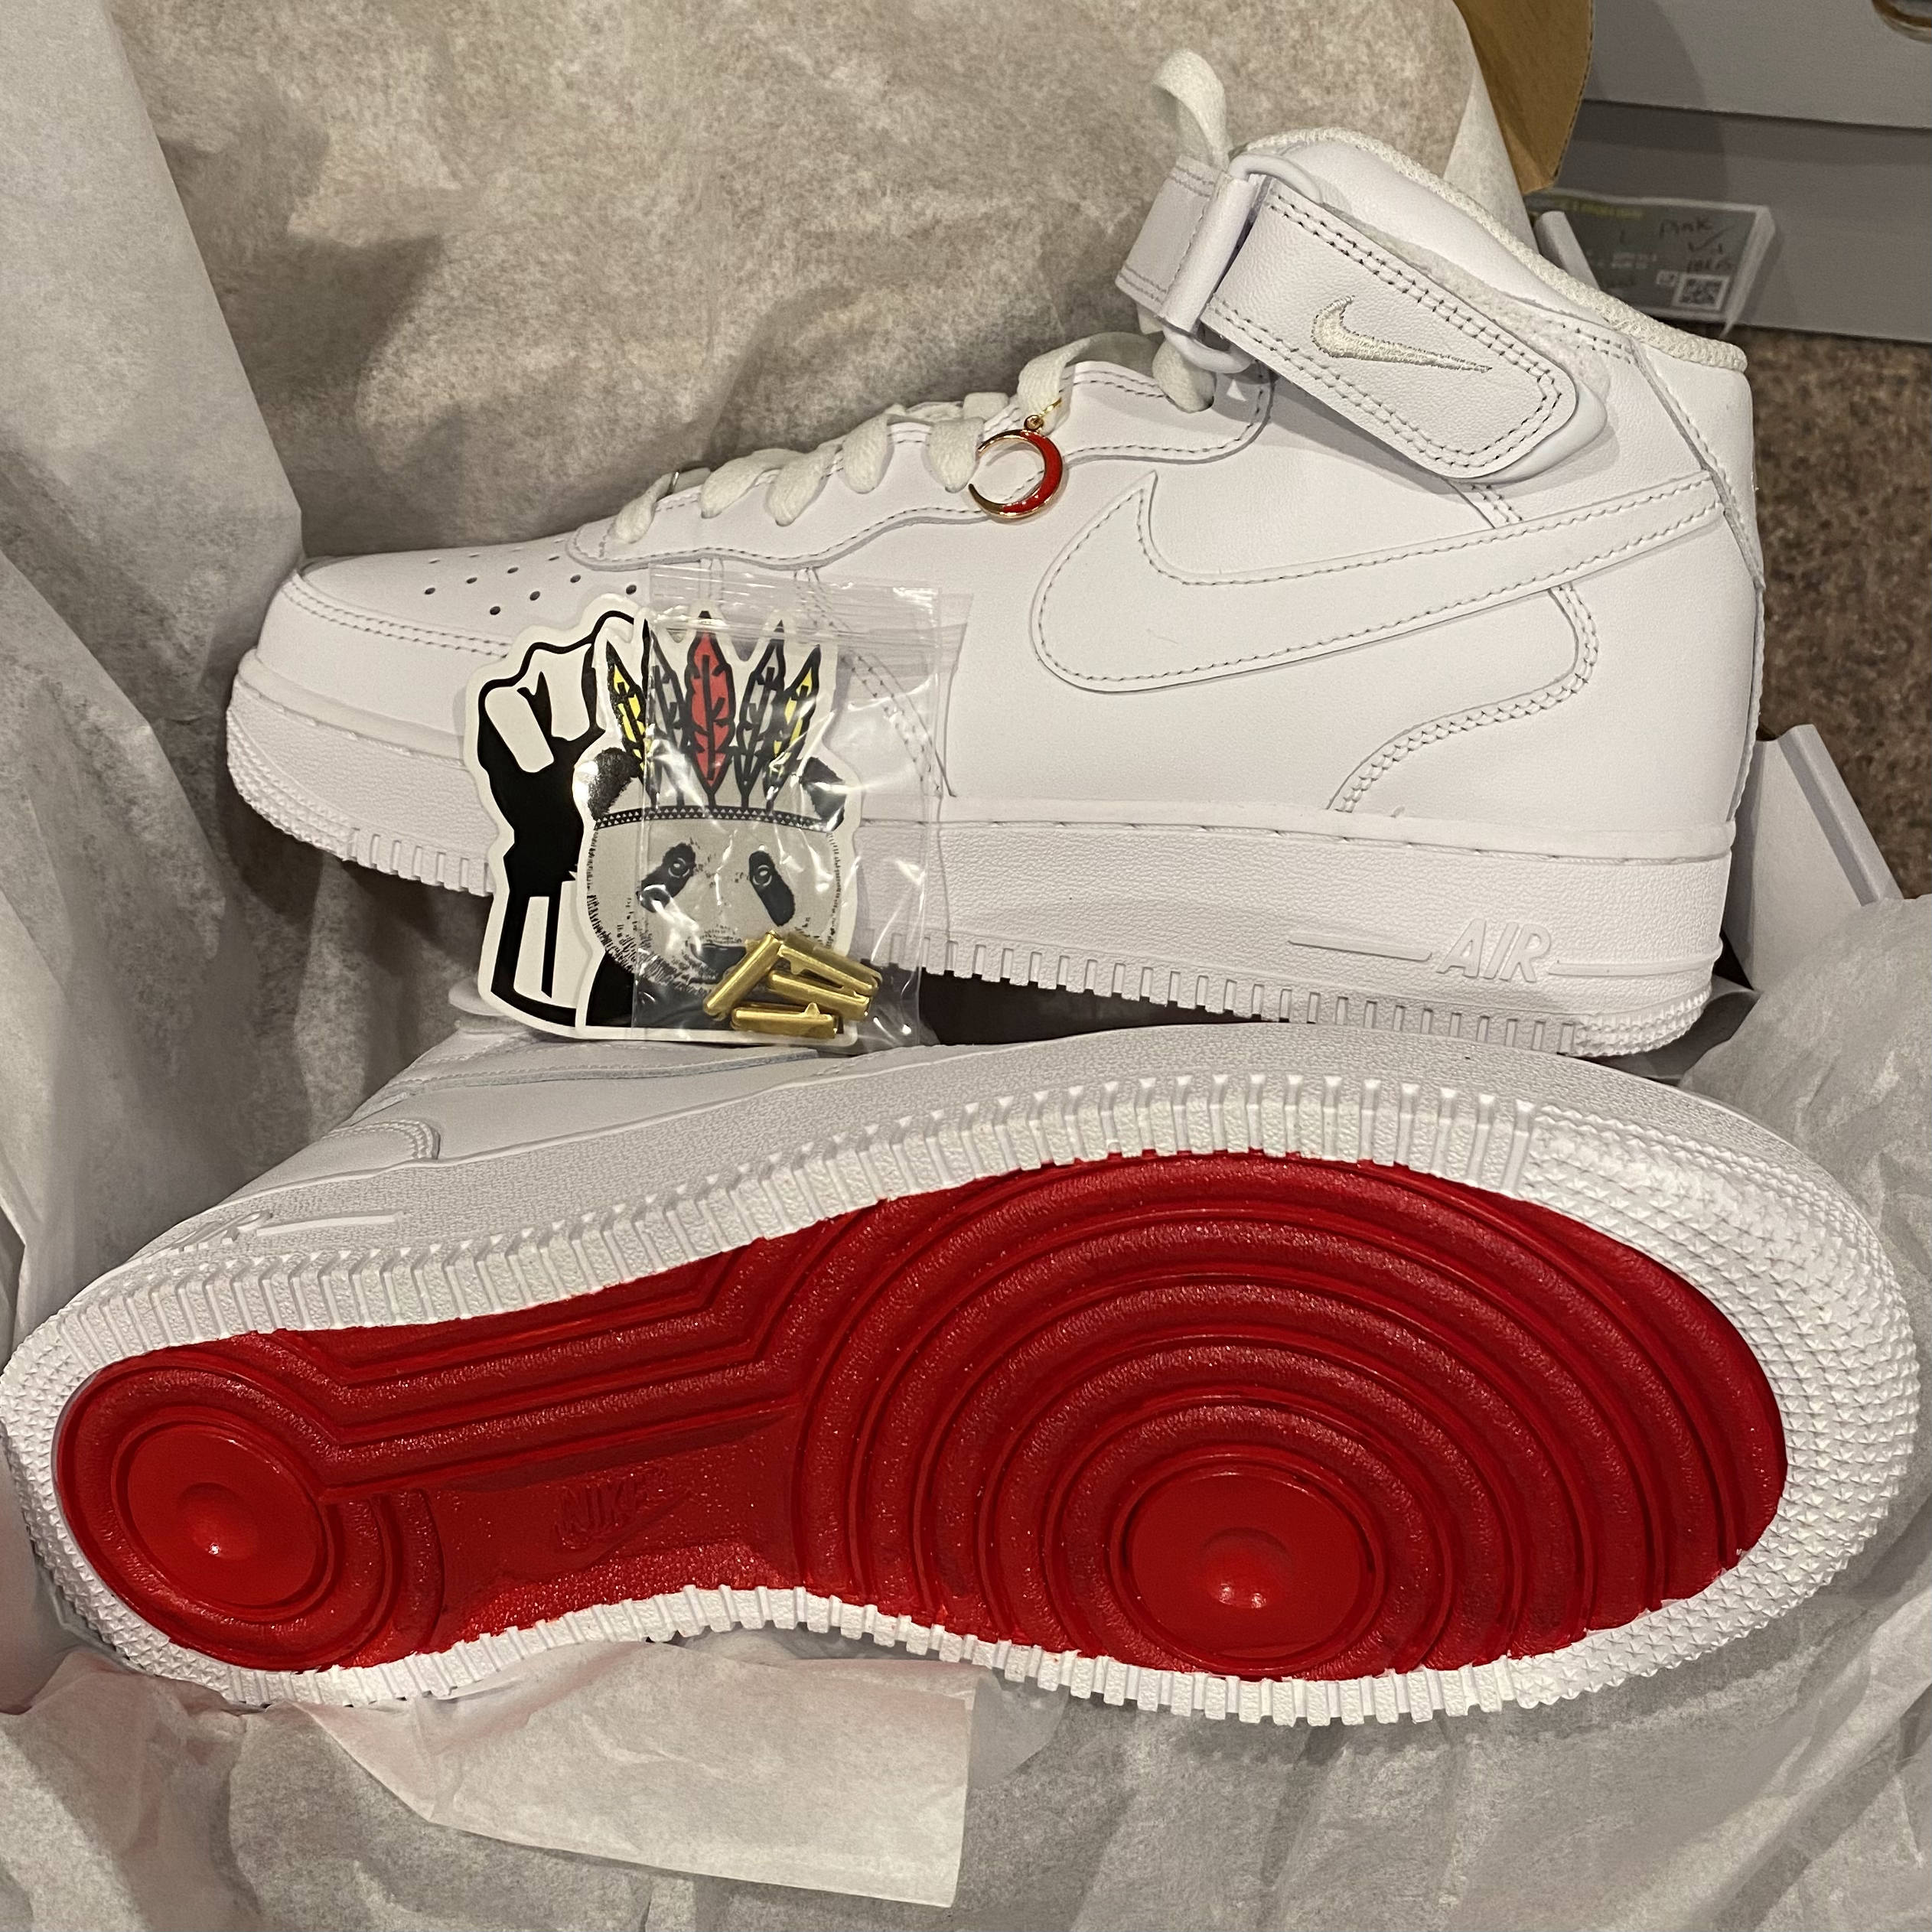 Red Bottoms - Custom Air Force 1 - Hand Painted AF1 - Custom